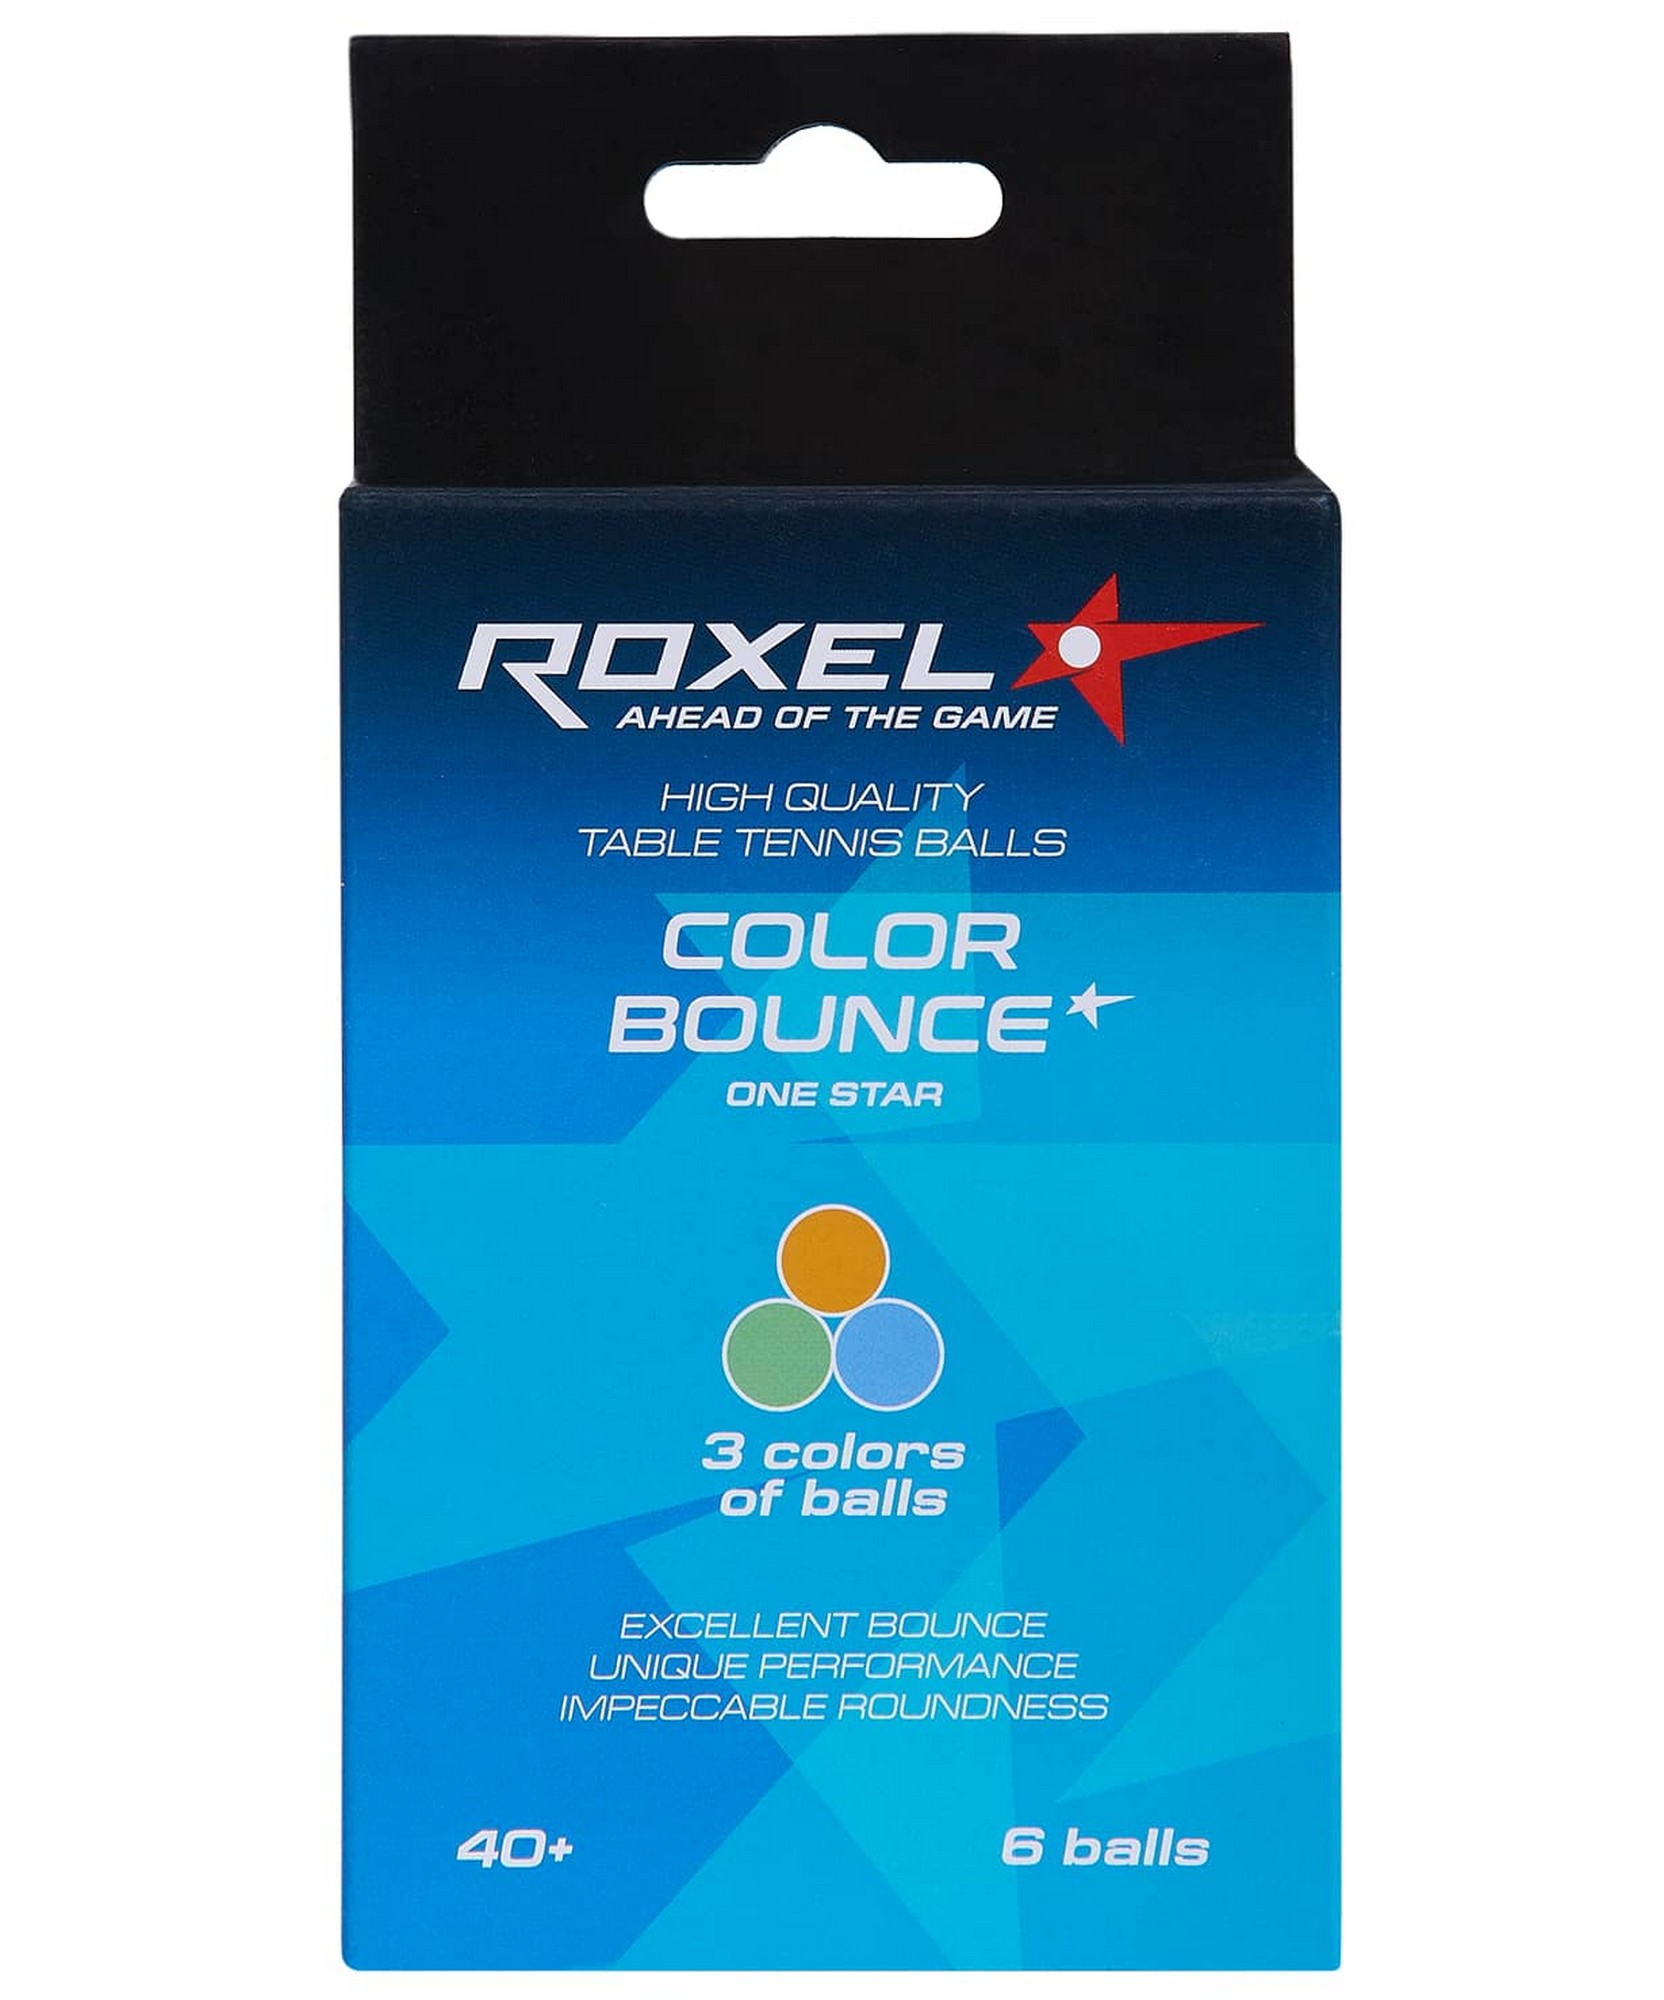     Roxel 1* Color Bounce, 6 